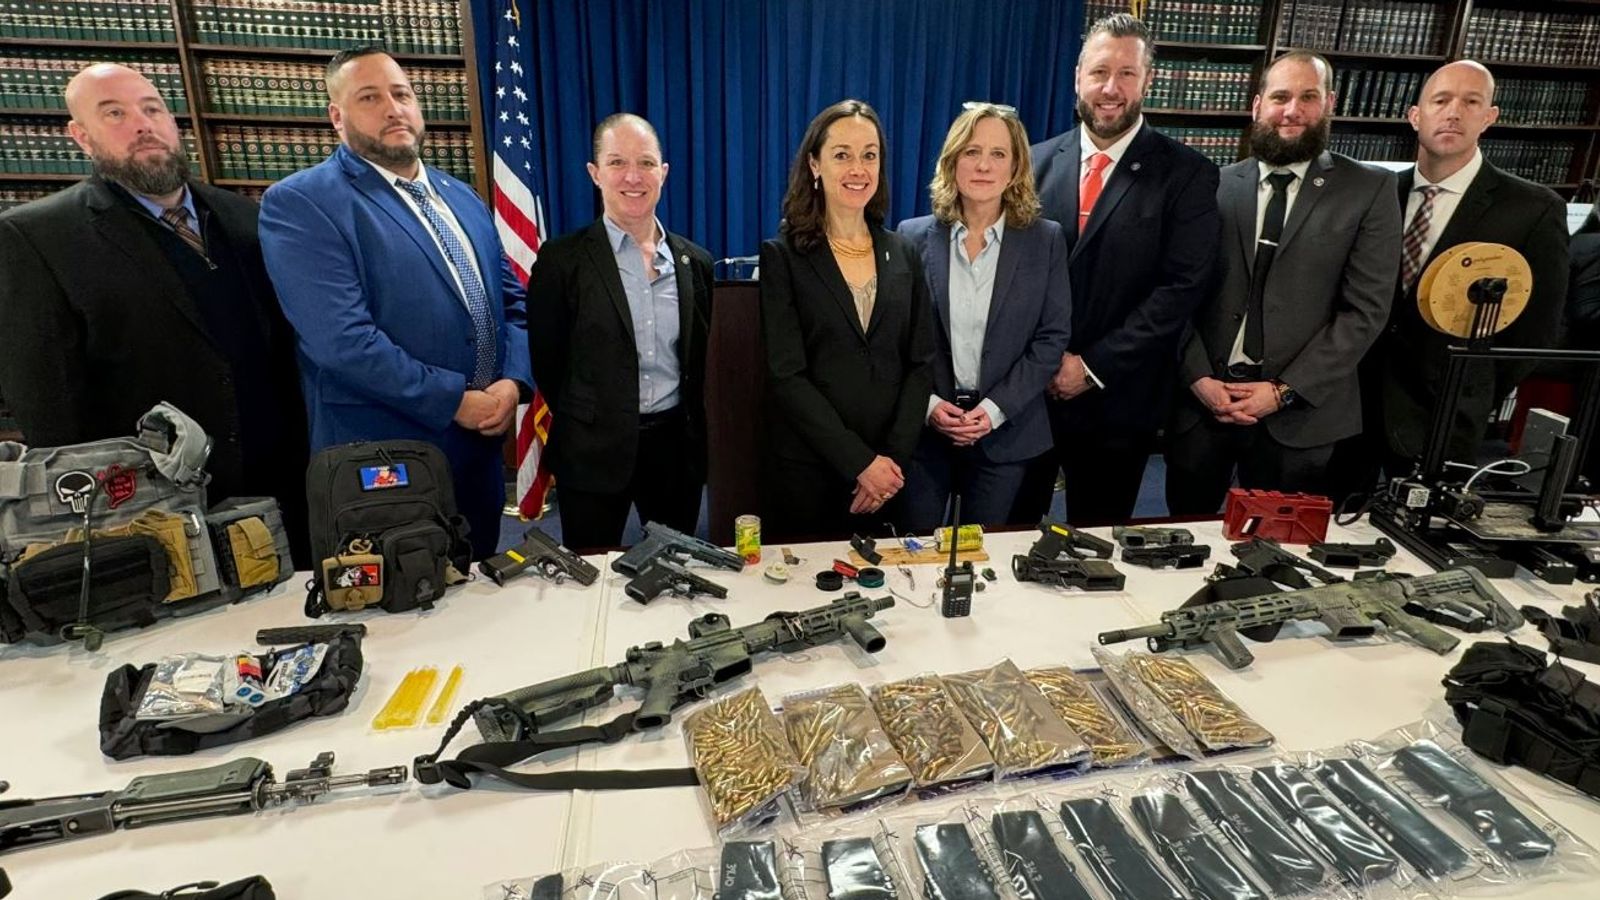 Brothers charged after weapons, explosives and 'hit list' of celeb targets found in New York